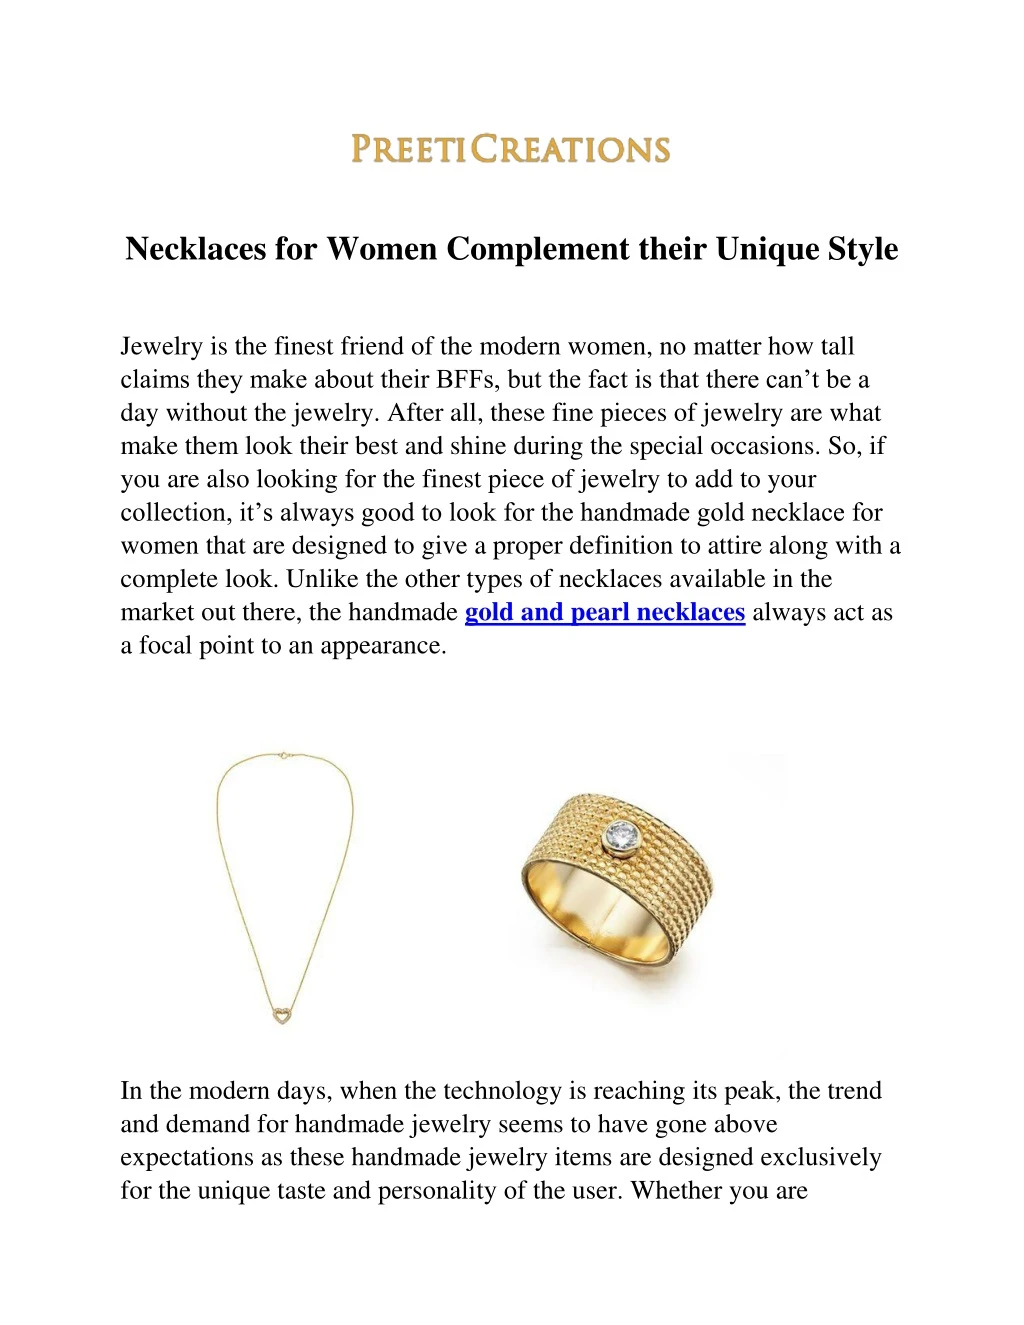 necklaces for women complement their unique style